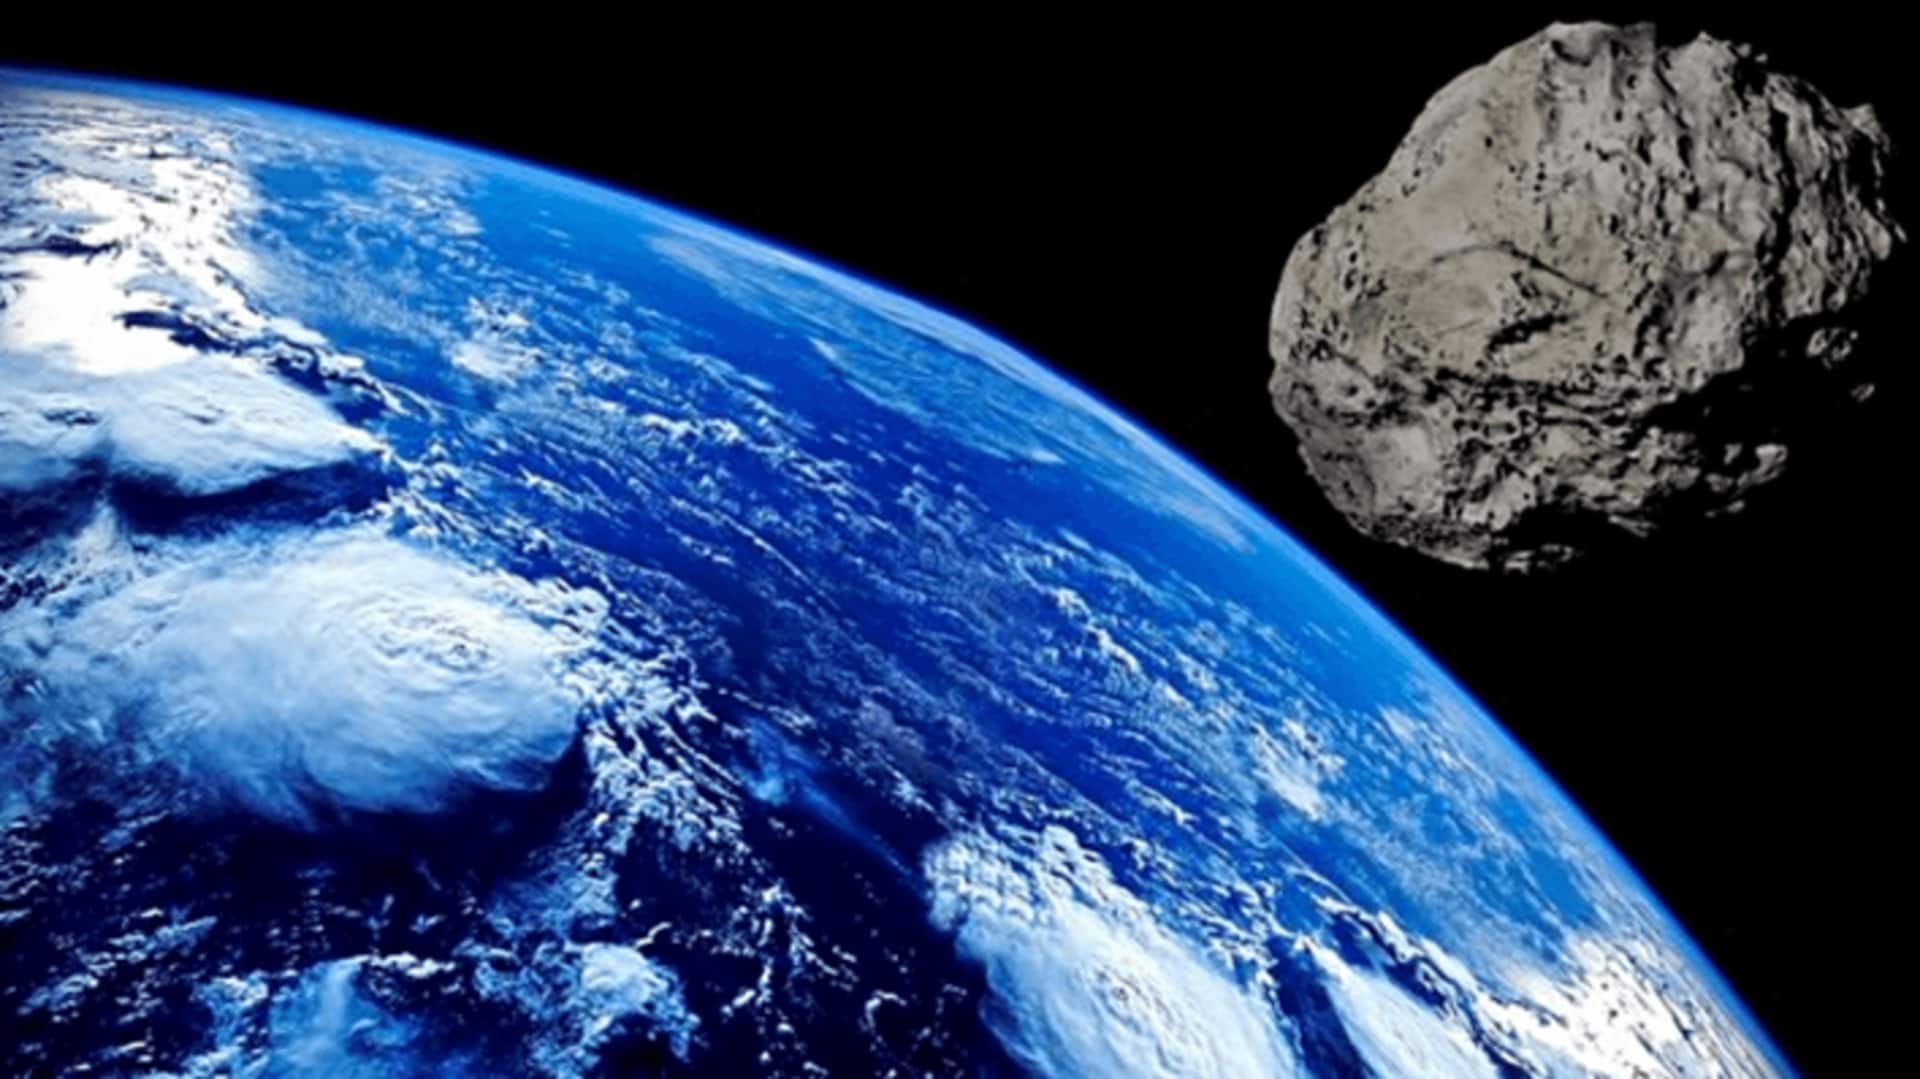 Bridge-sized asteroid will come close to Earth today, warns NASA